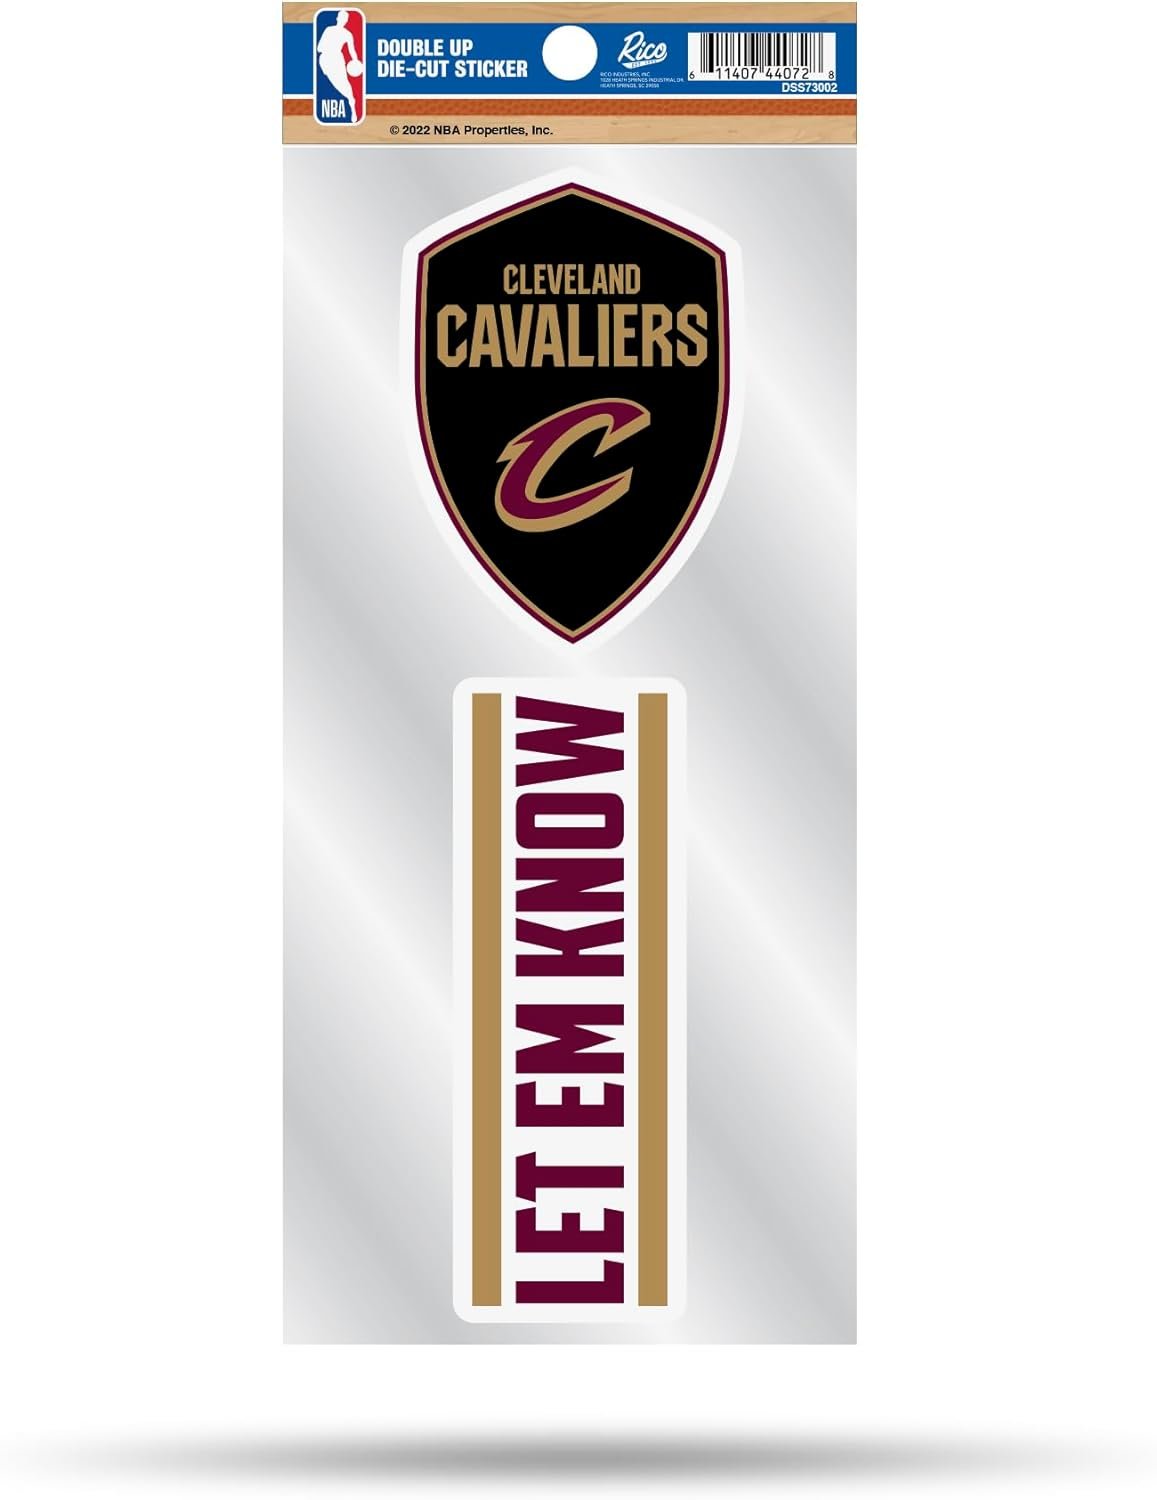 Cleveland Cavaliers Double Up Die Cut Sticker Decal Sheet, 4x8 Inch